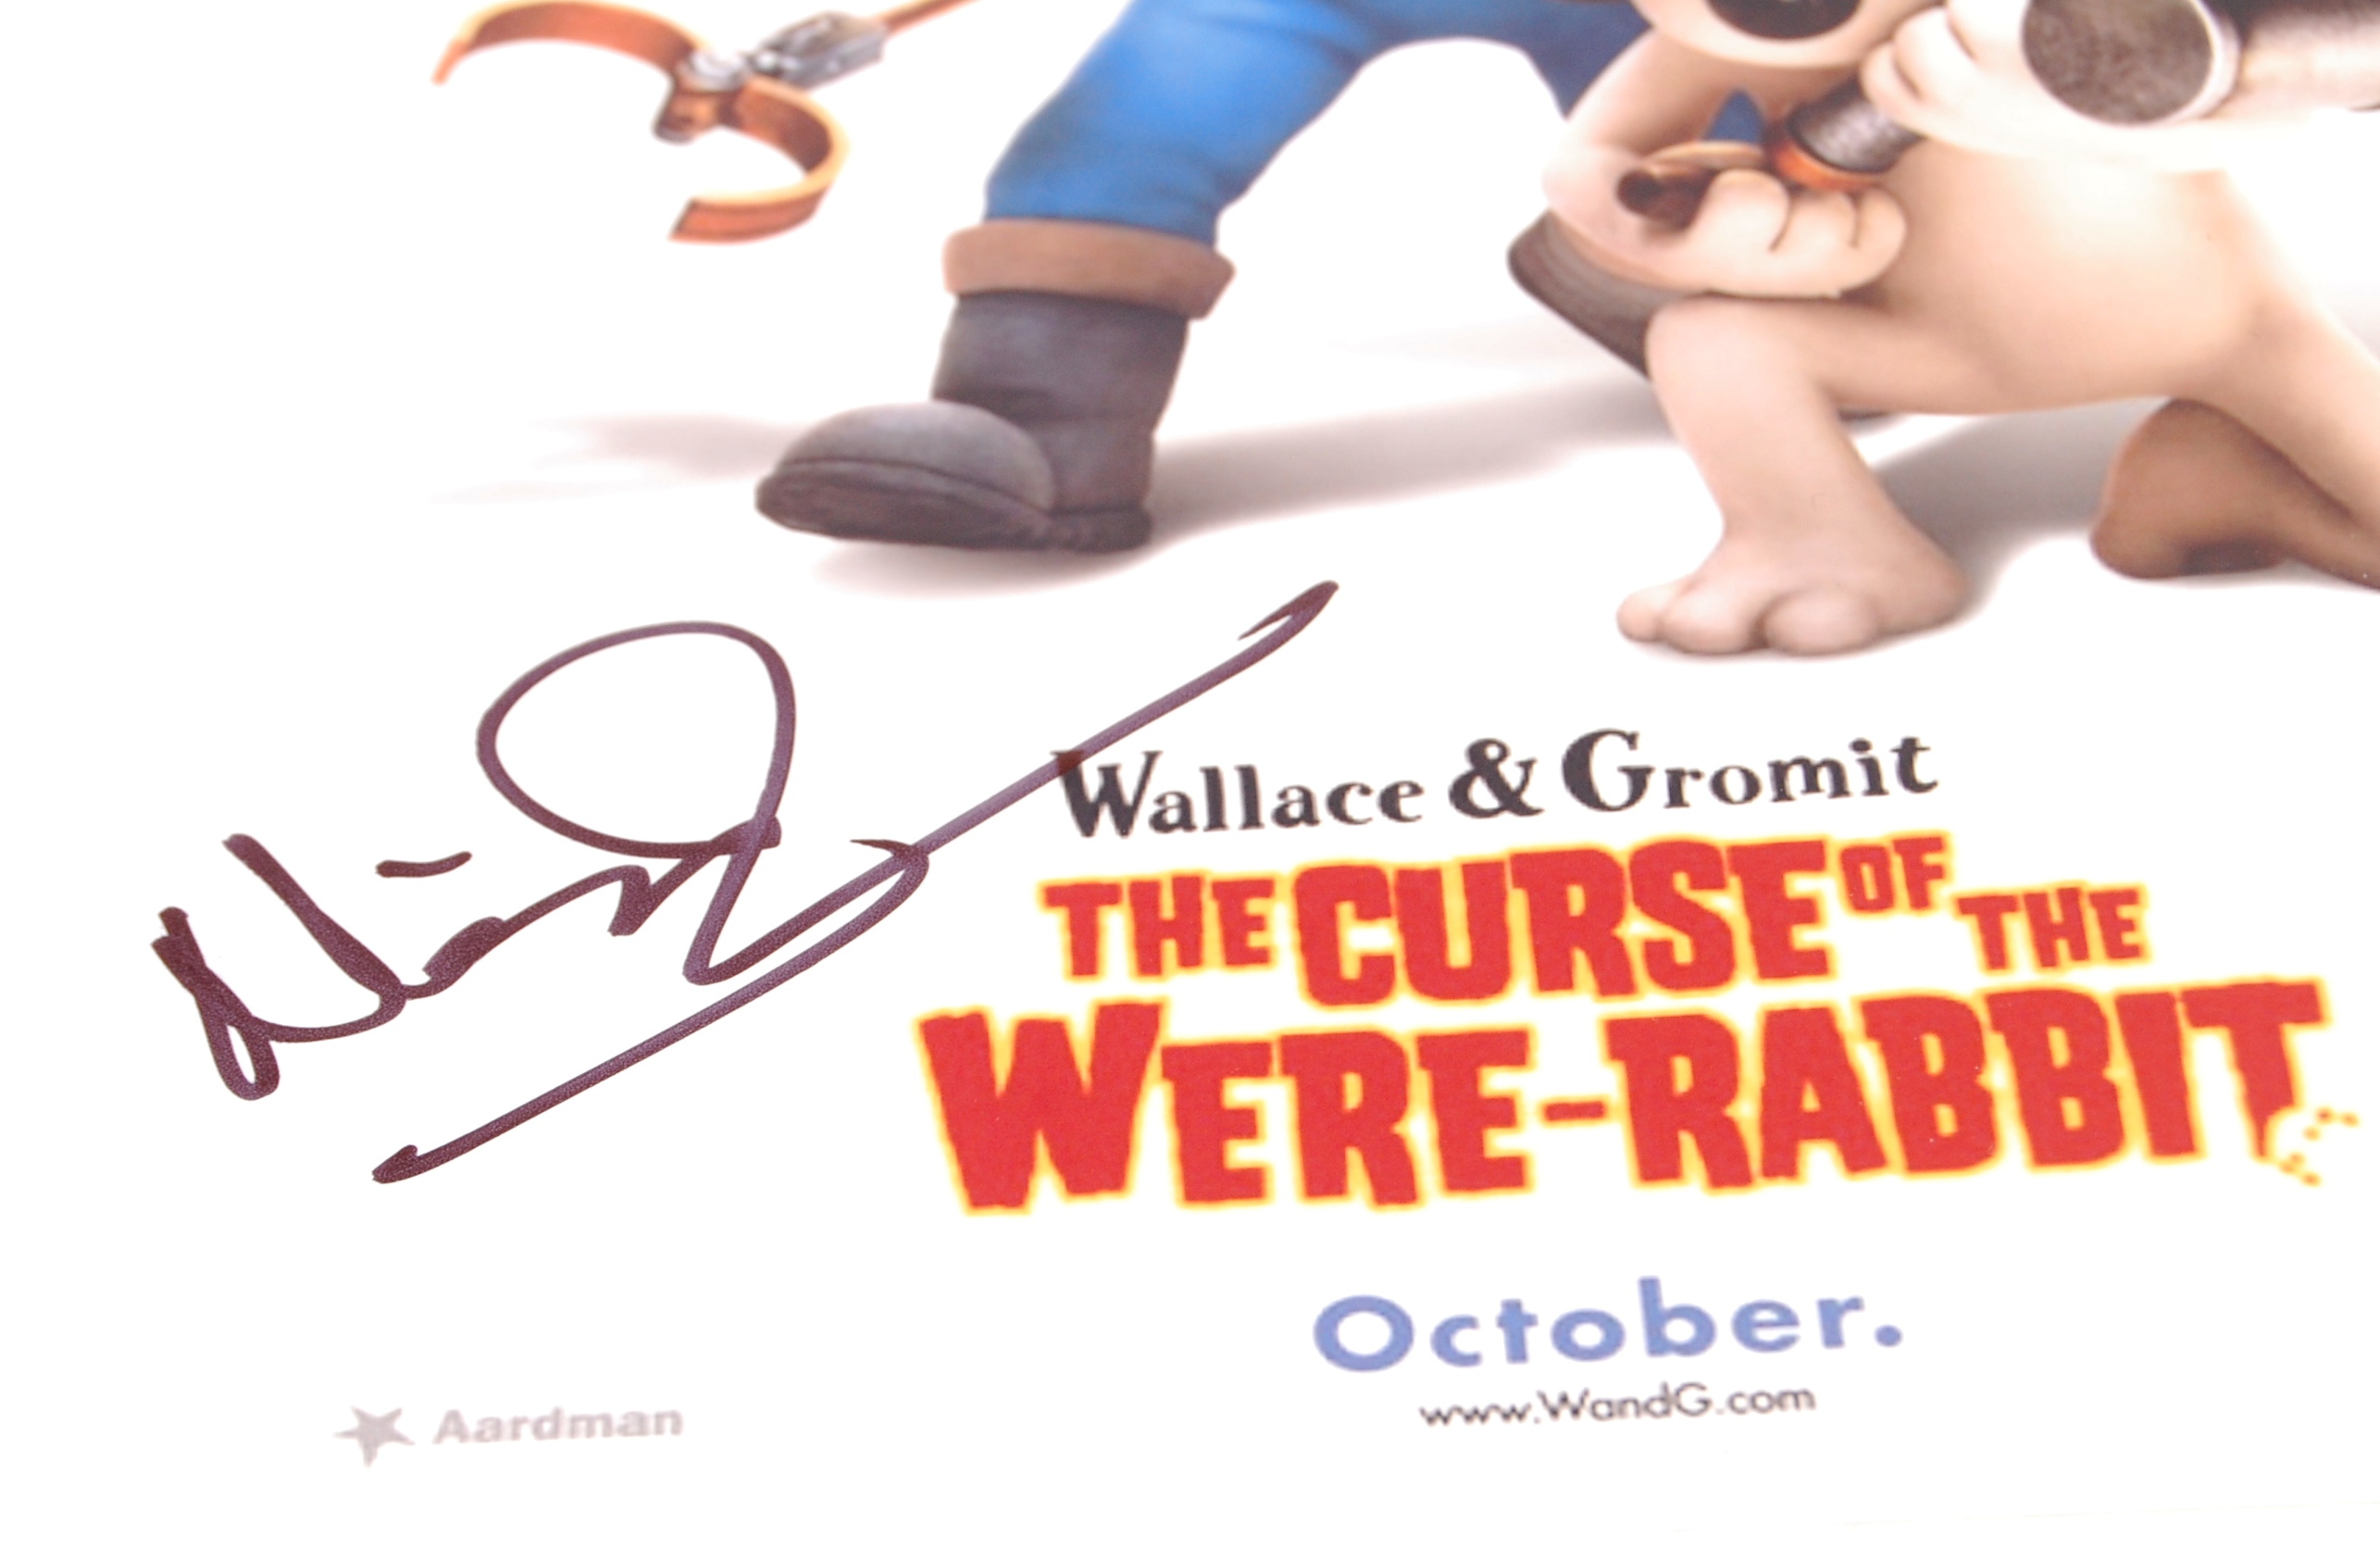 WALLACE & GROMIT - NICK PARK - AUTOGRAPHED 8x10" PHOTO - Image 2 of 2